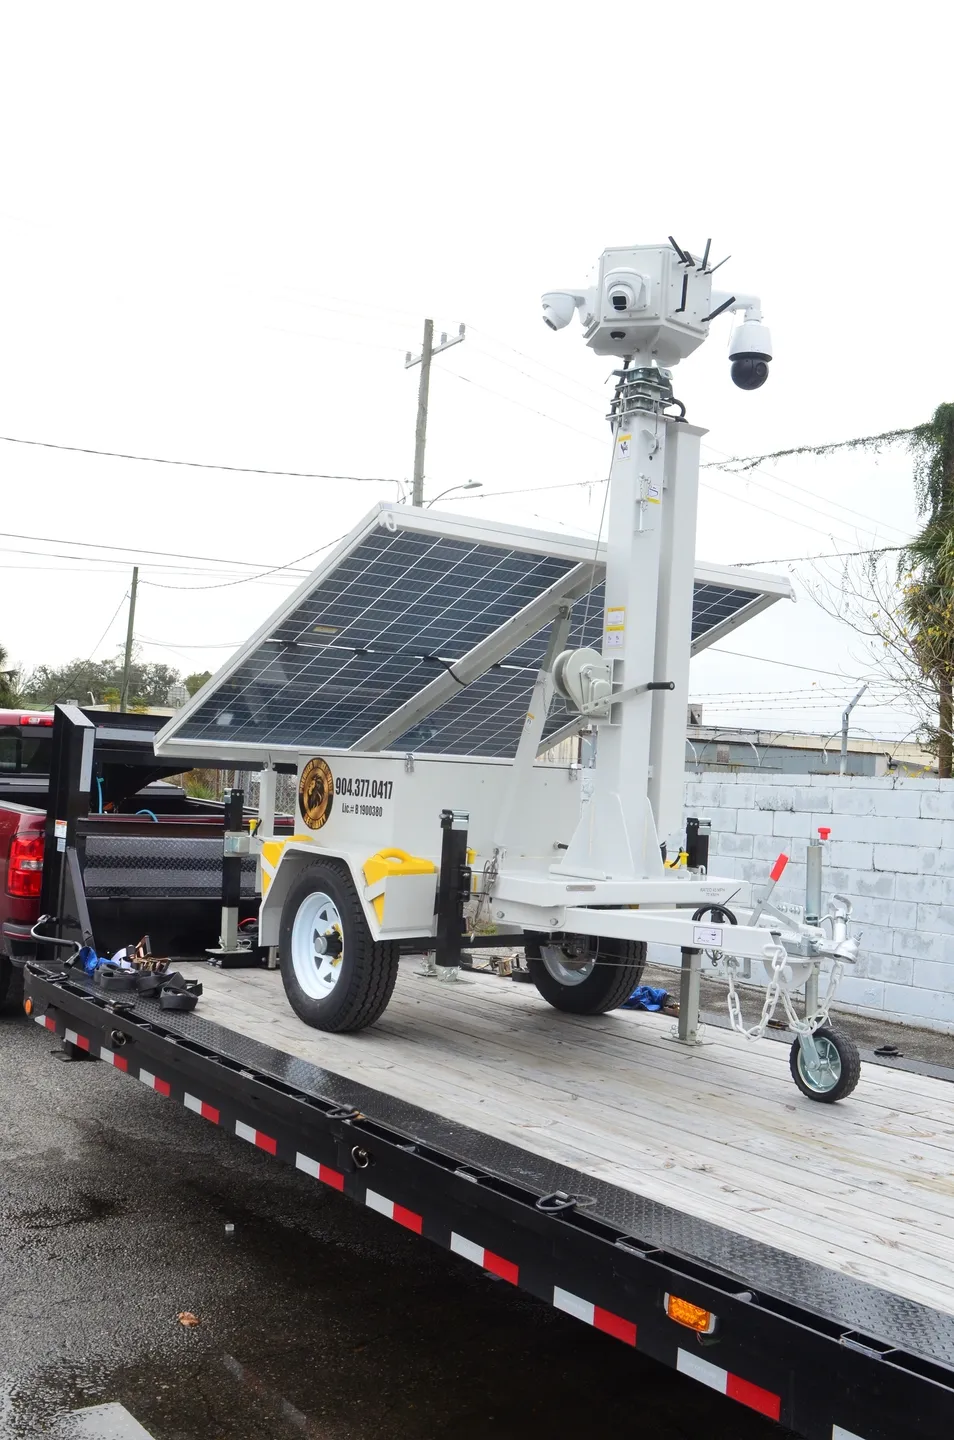 A trailer with a solar panel on it